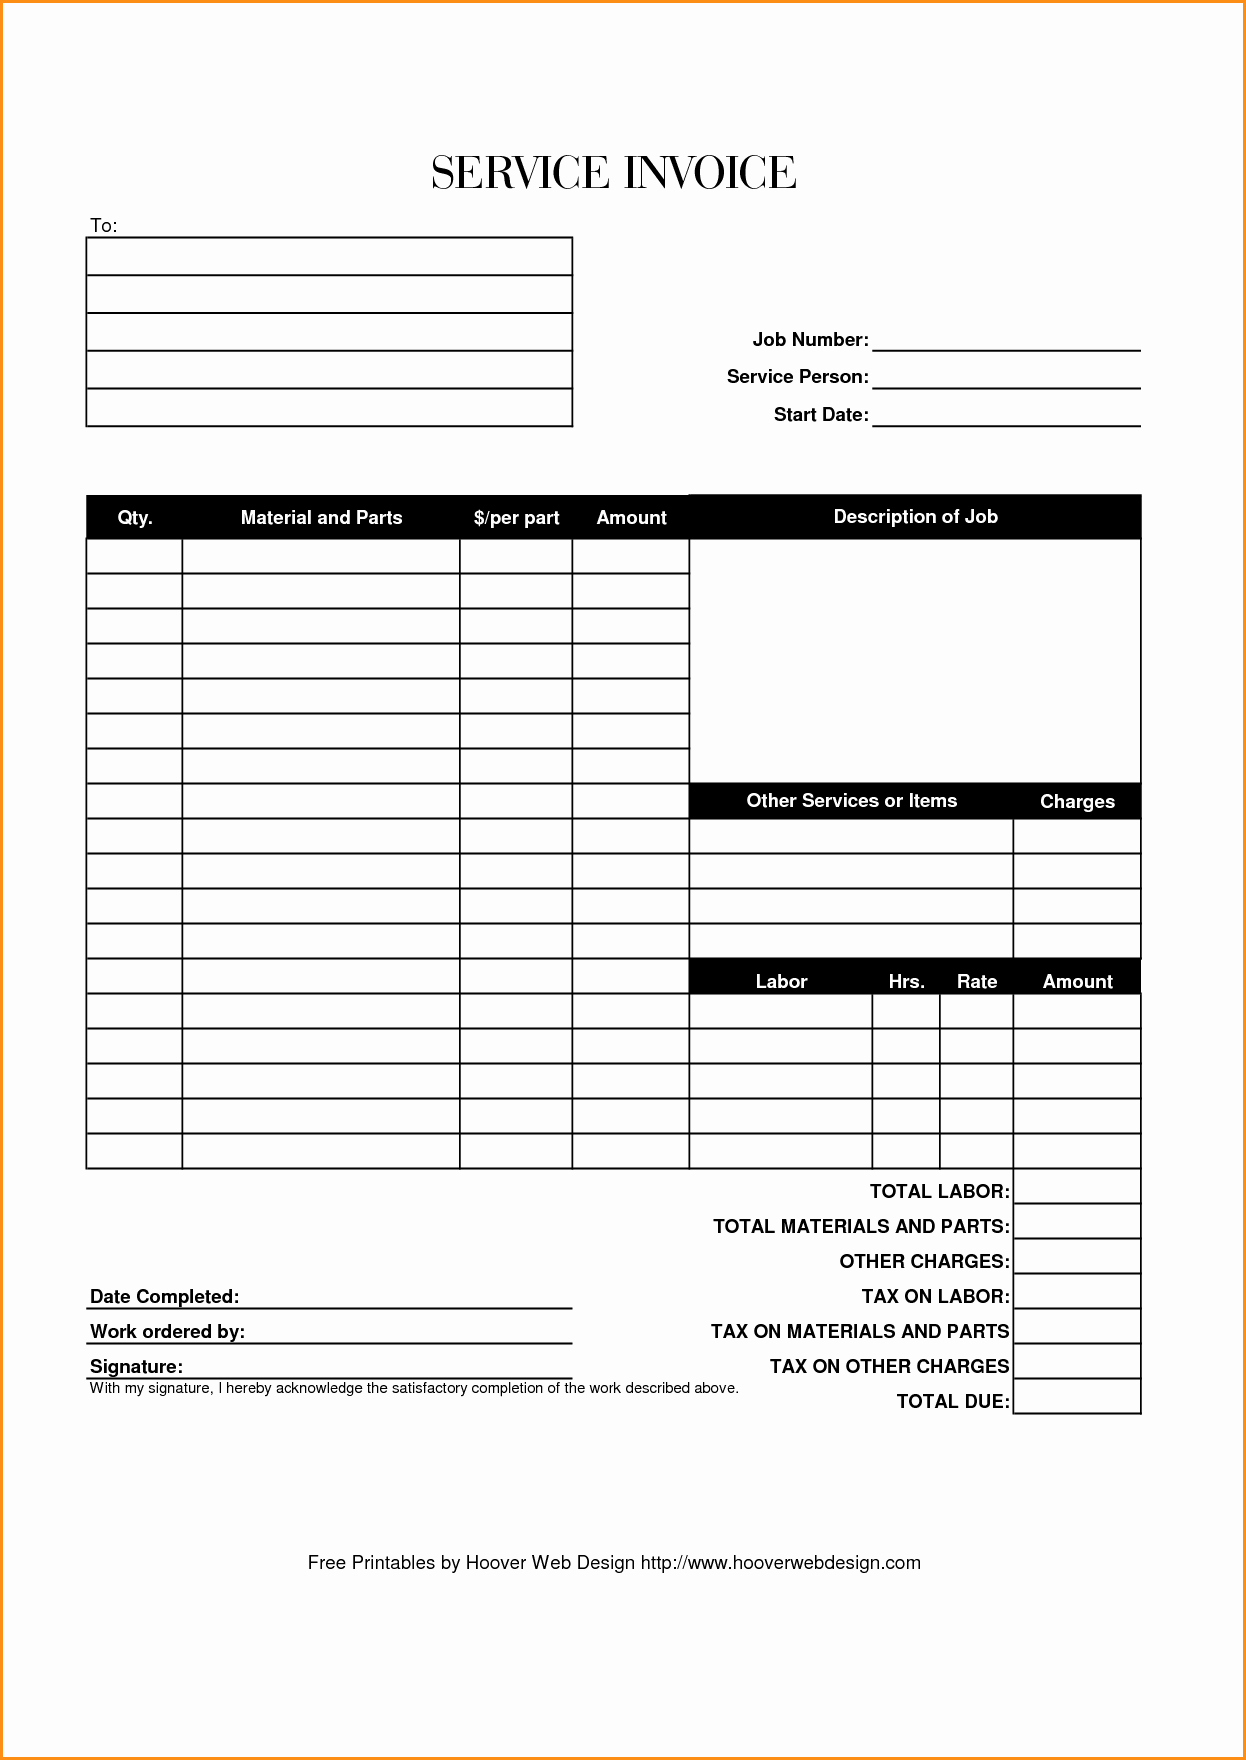 Free Printable Service Invoice Template Awesome 7 Printable Invoices